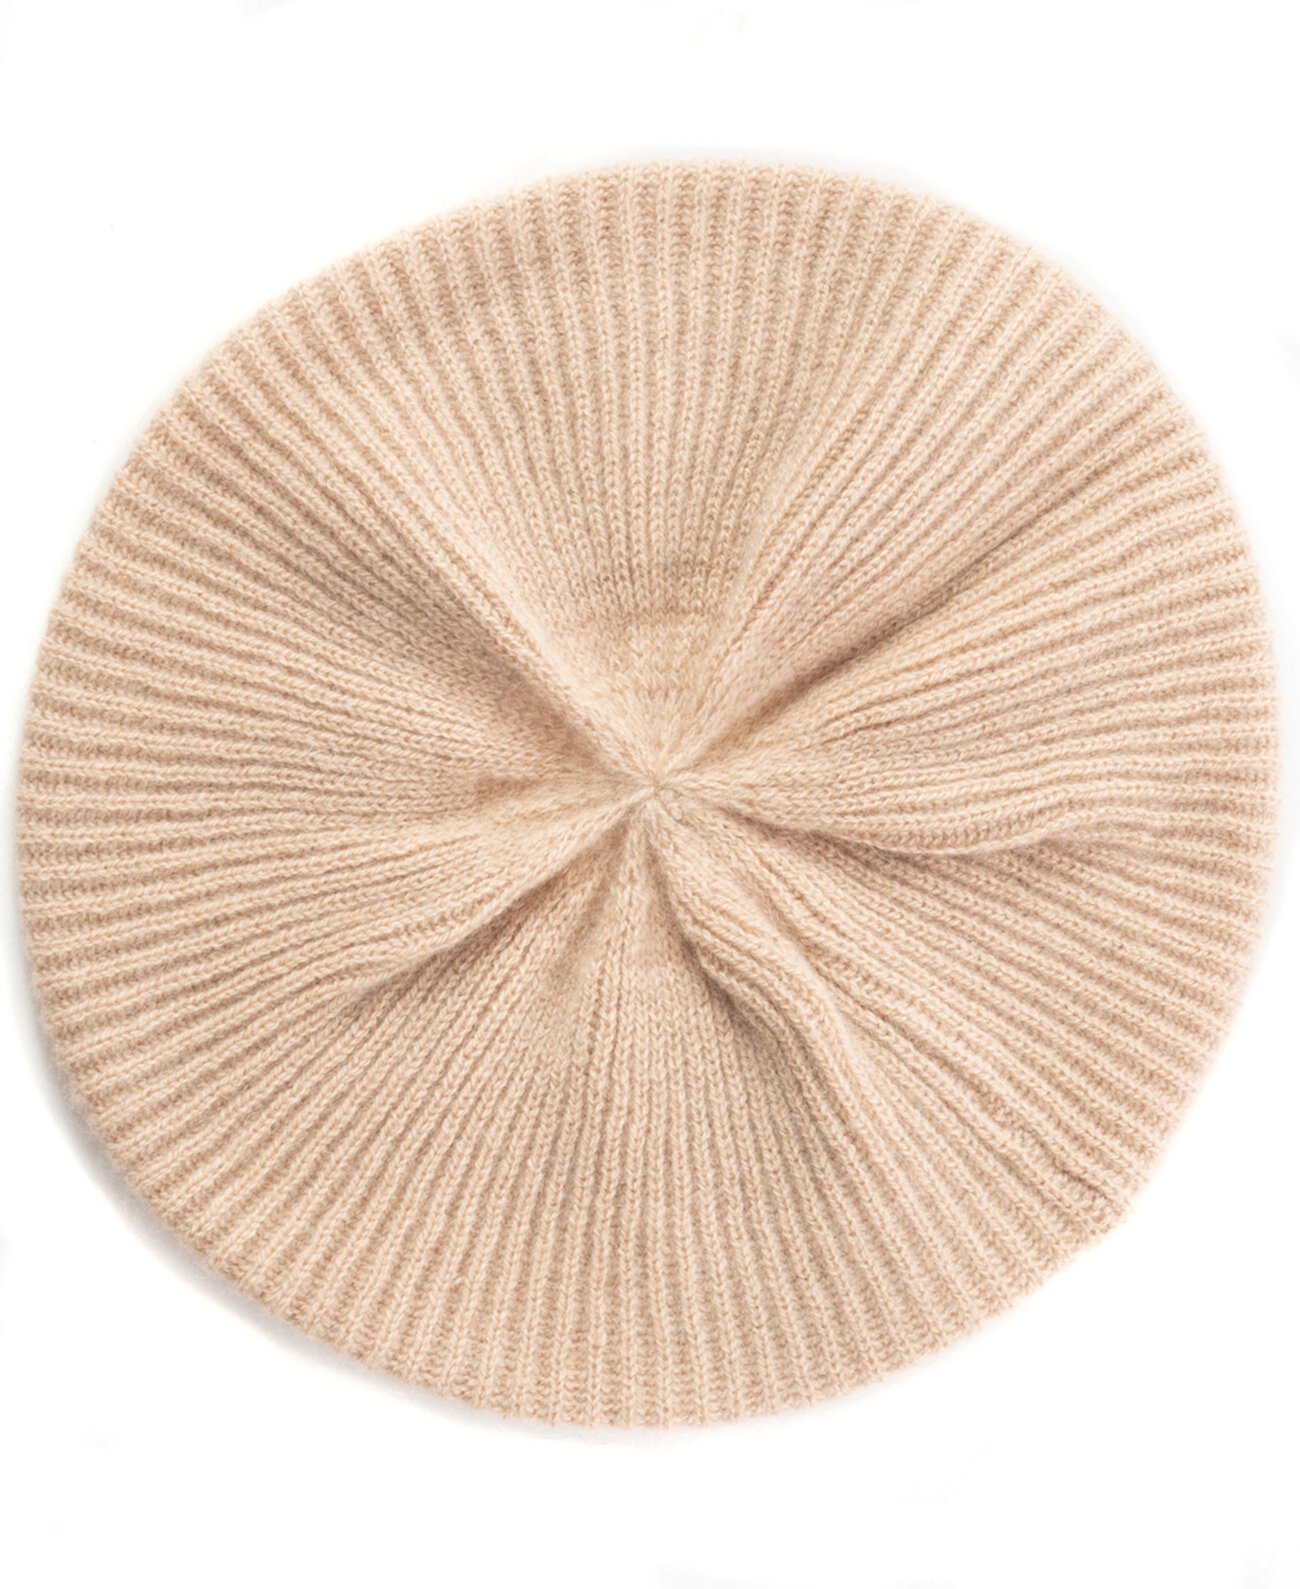 Cashmere Beret, Created for Macy's Charter Club